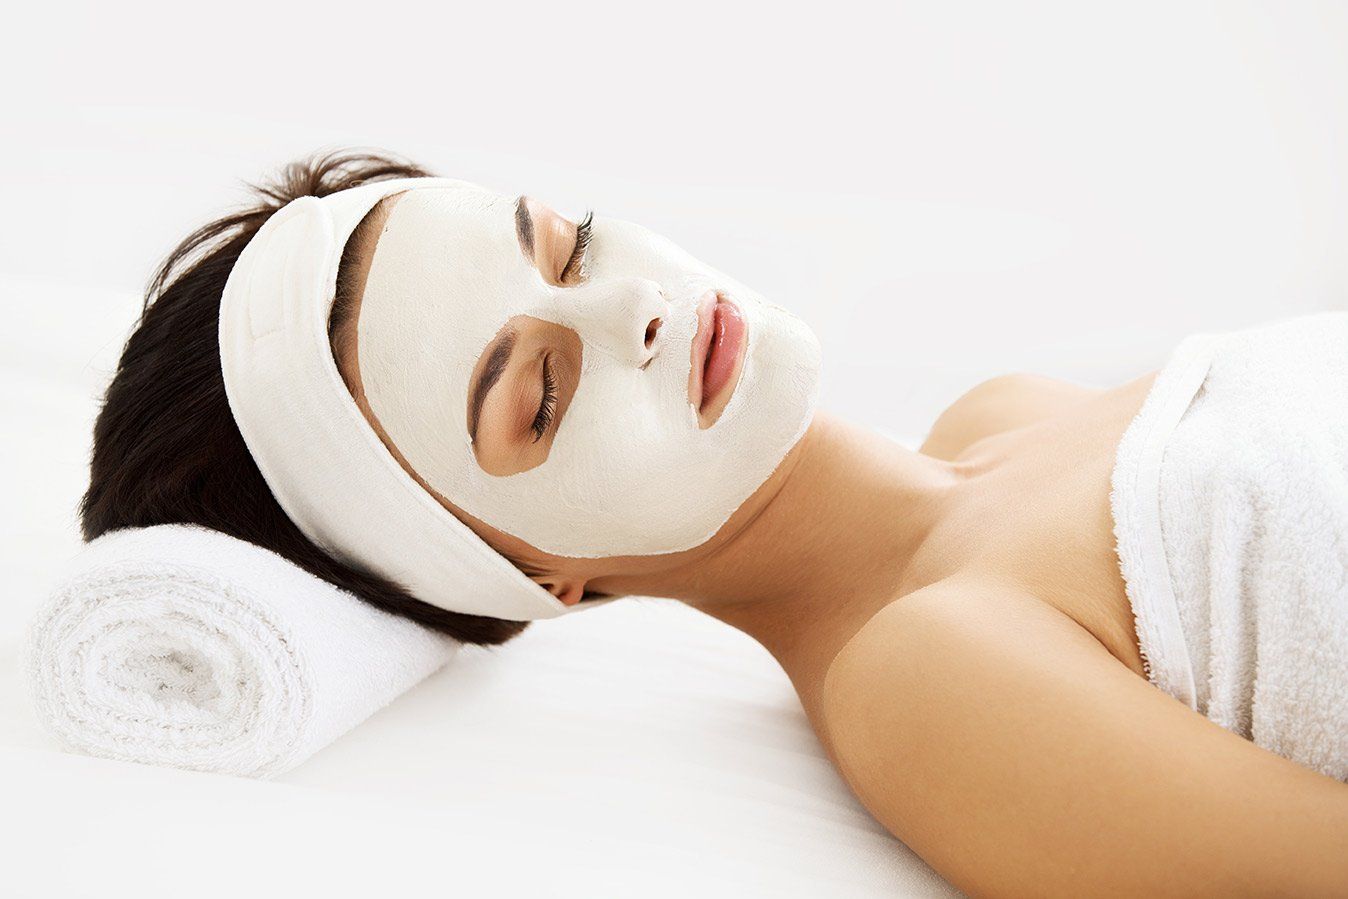 Lady with a white headband having a facial. With a white facial mask.